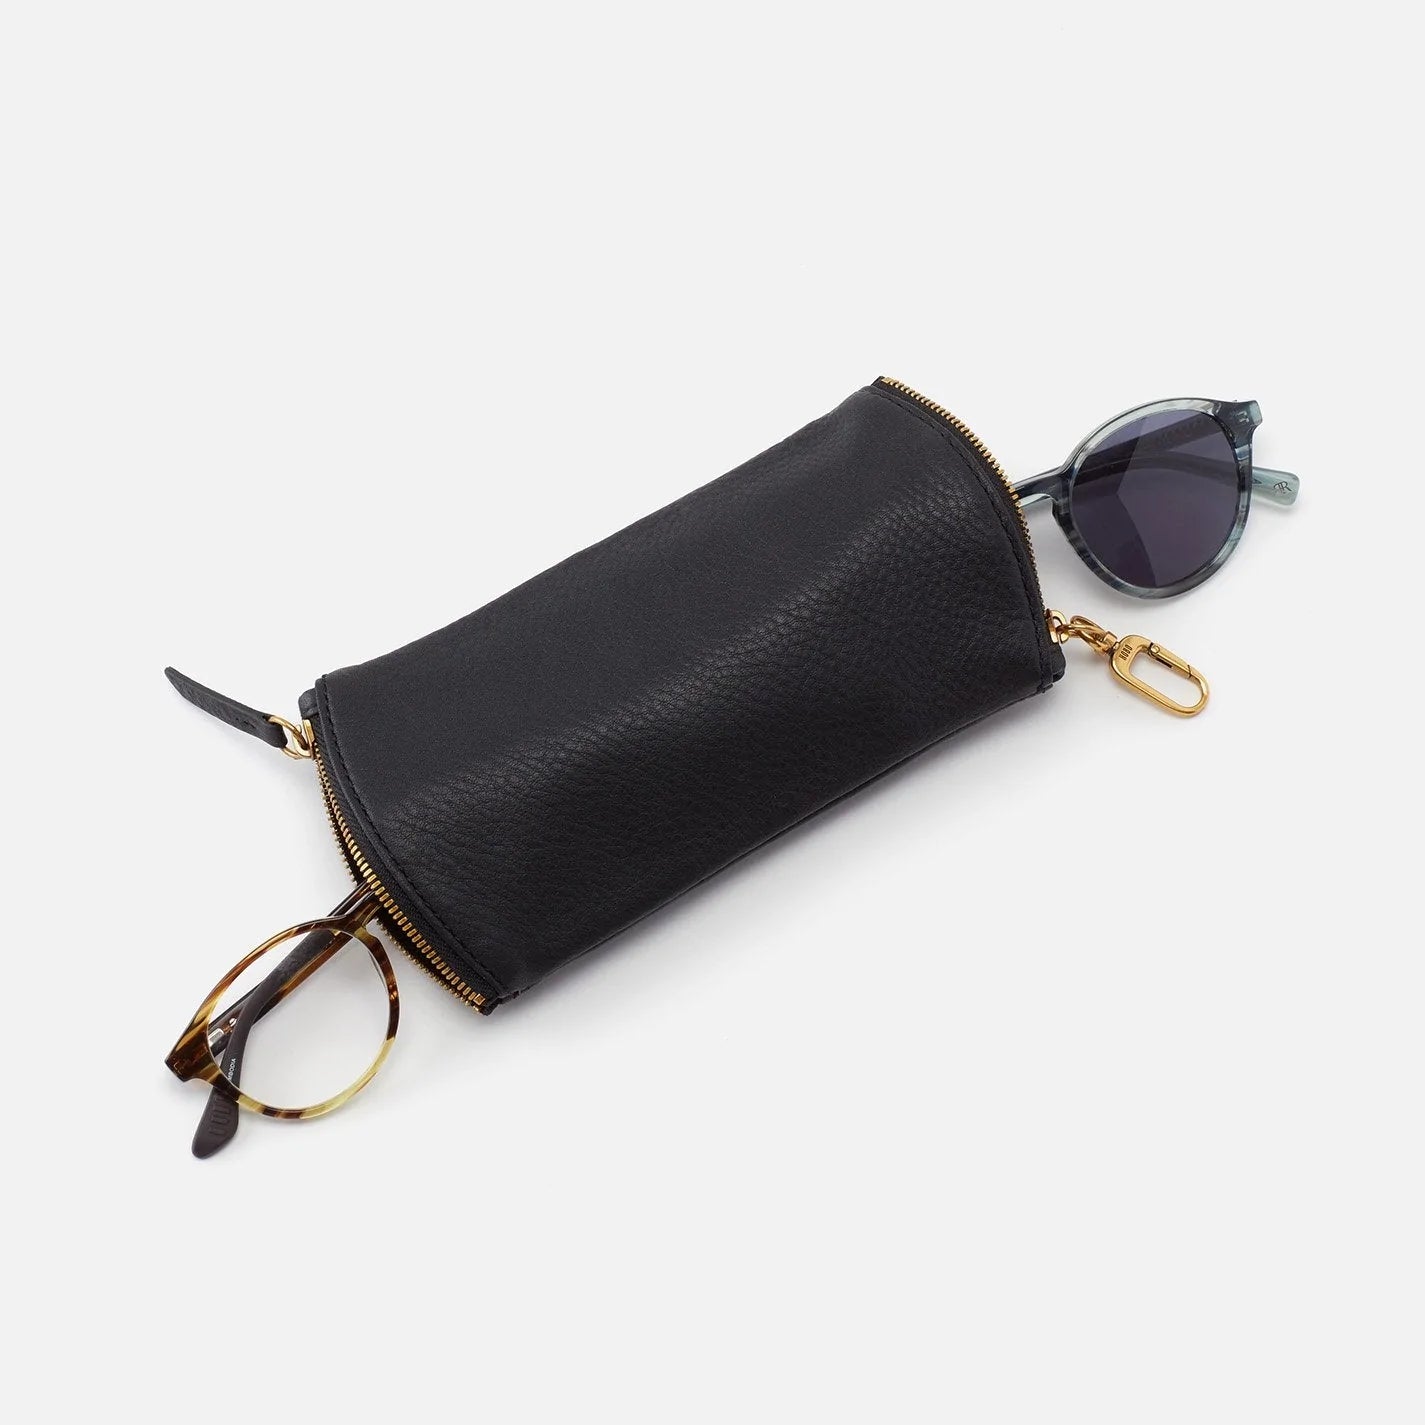 The Spark in black is a double eyeglass case that has an easy-to-use clip for attaching to your bag and two compartments for your favorite glasses. Shop for it at the Painted Cottage in Edgewater, MD